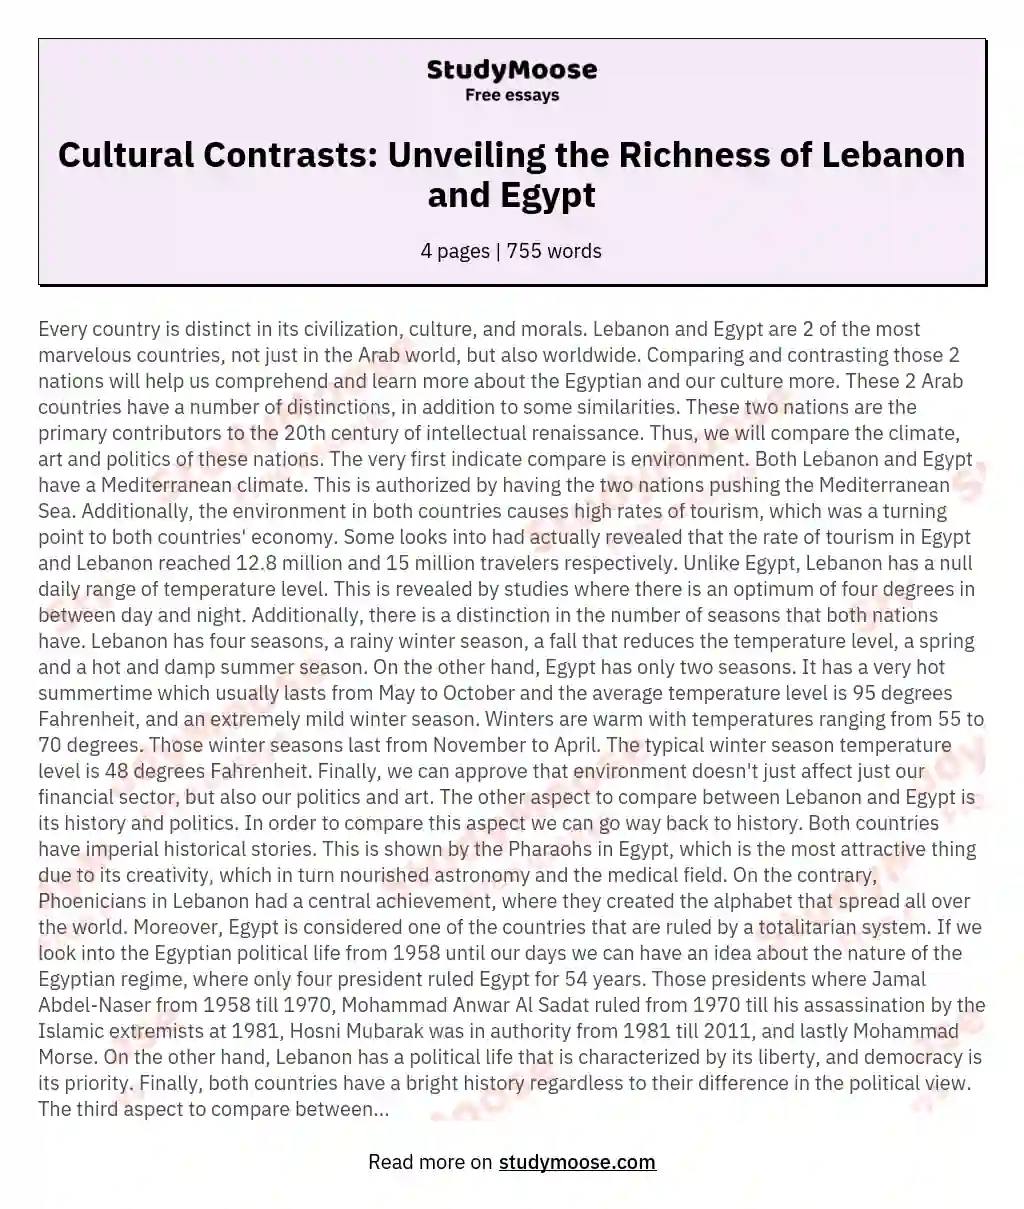 Cultural Contrasts: Unveiling the Richness of Lebanon and Egypt essay